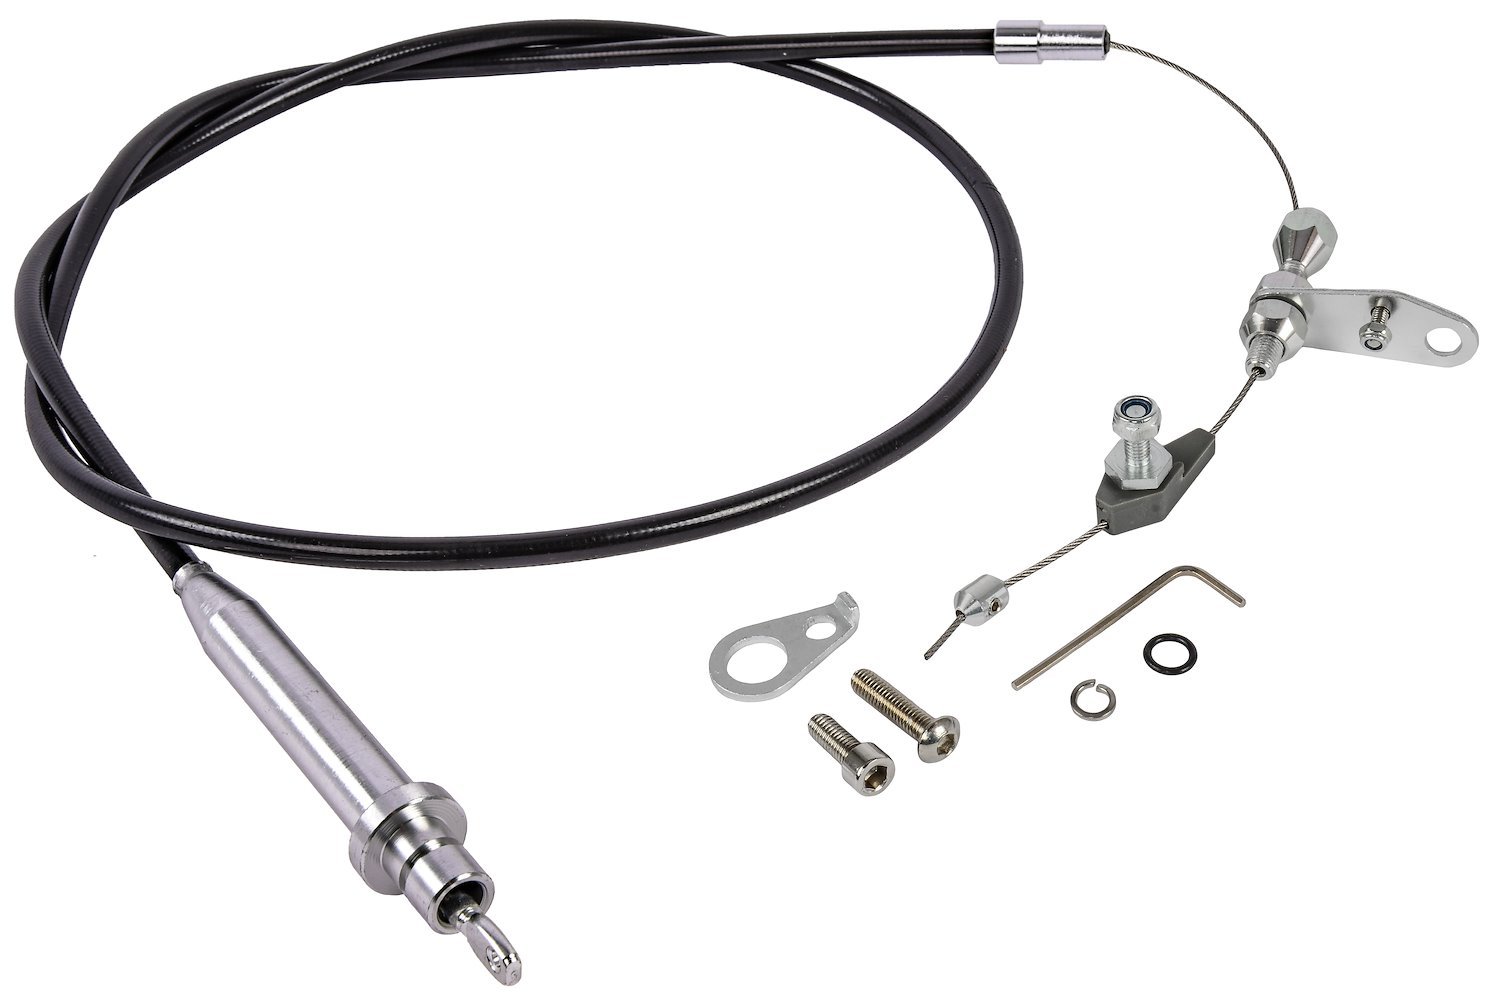 JEGS 157030: Transmission Kickdown Cable Kit | Small Block GMC/Chevy TH350  | Black Cable Jacket | Aluminum Fittings | Polished Ferrule | 56 in. Cable  Length | 41 1/2 in. Sleeve Length - JEGS